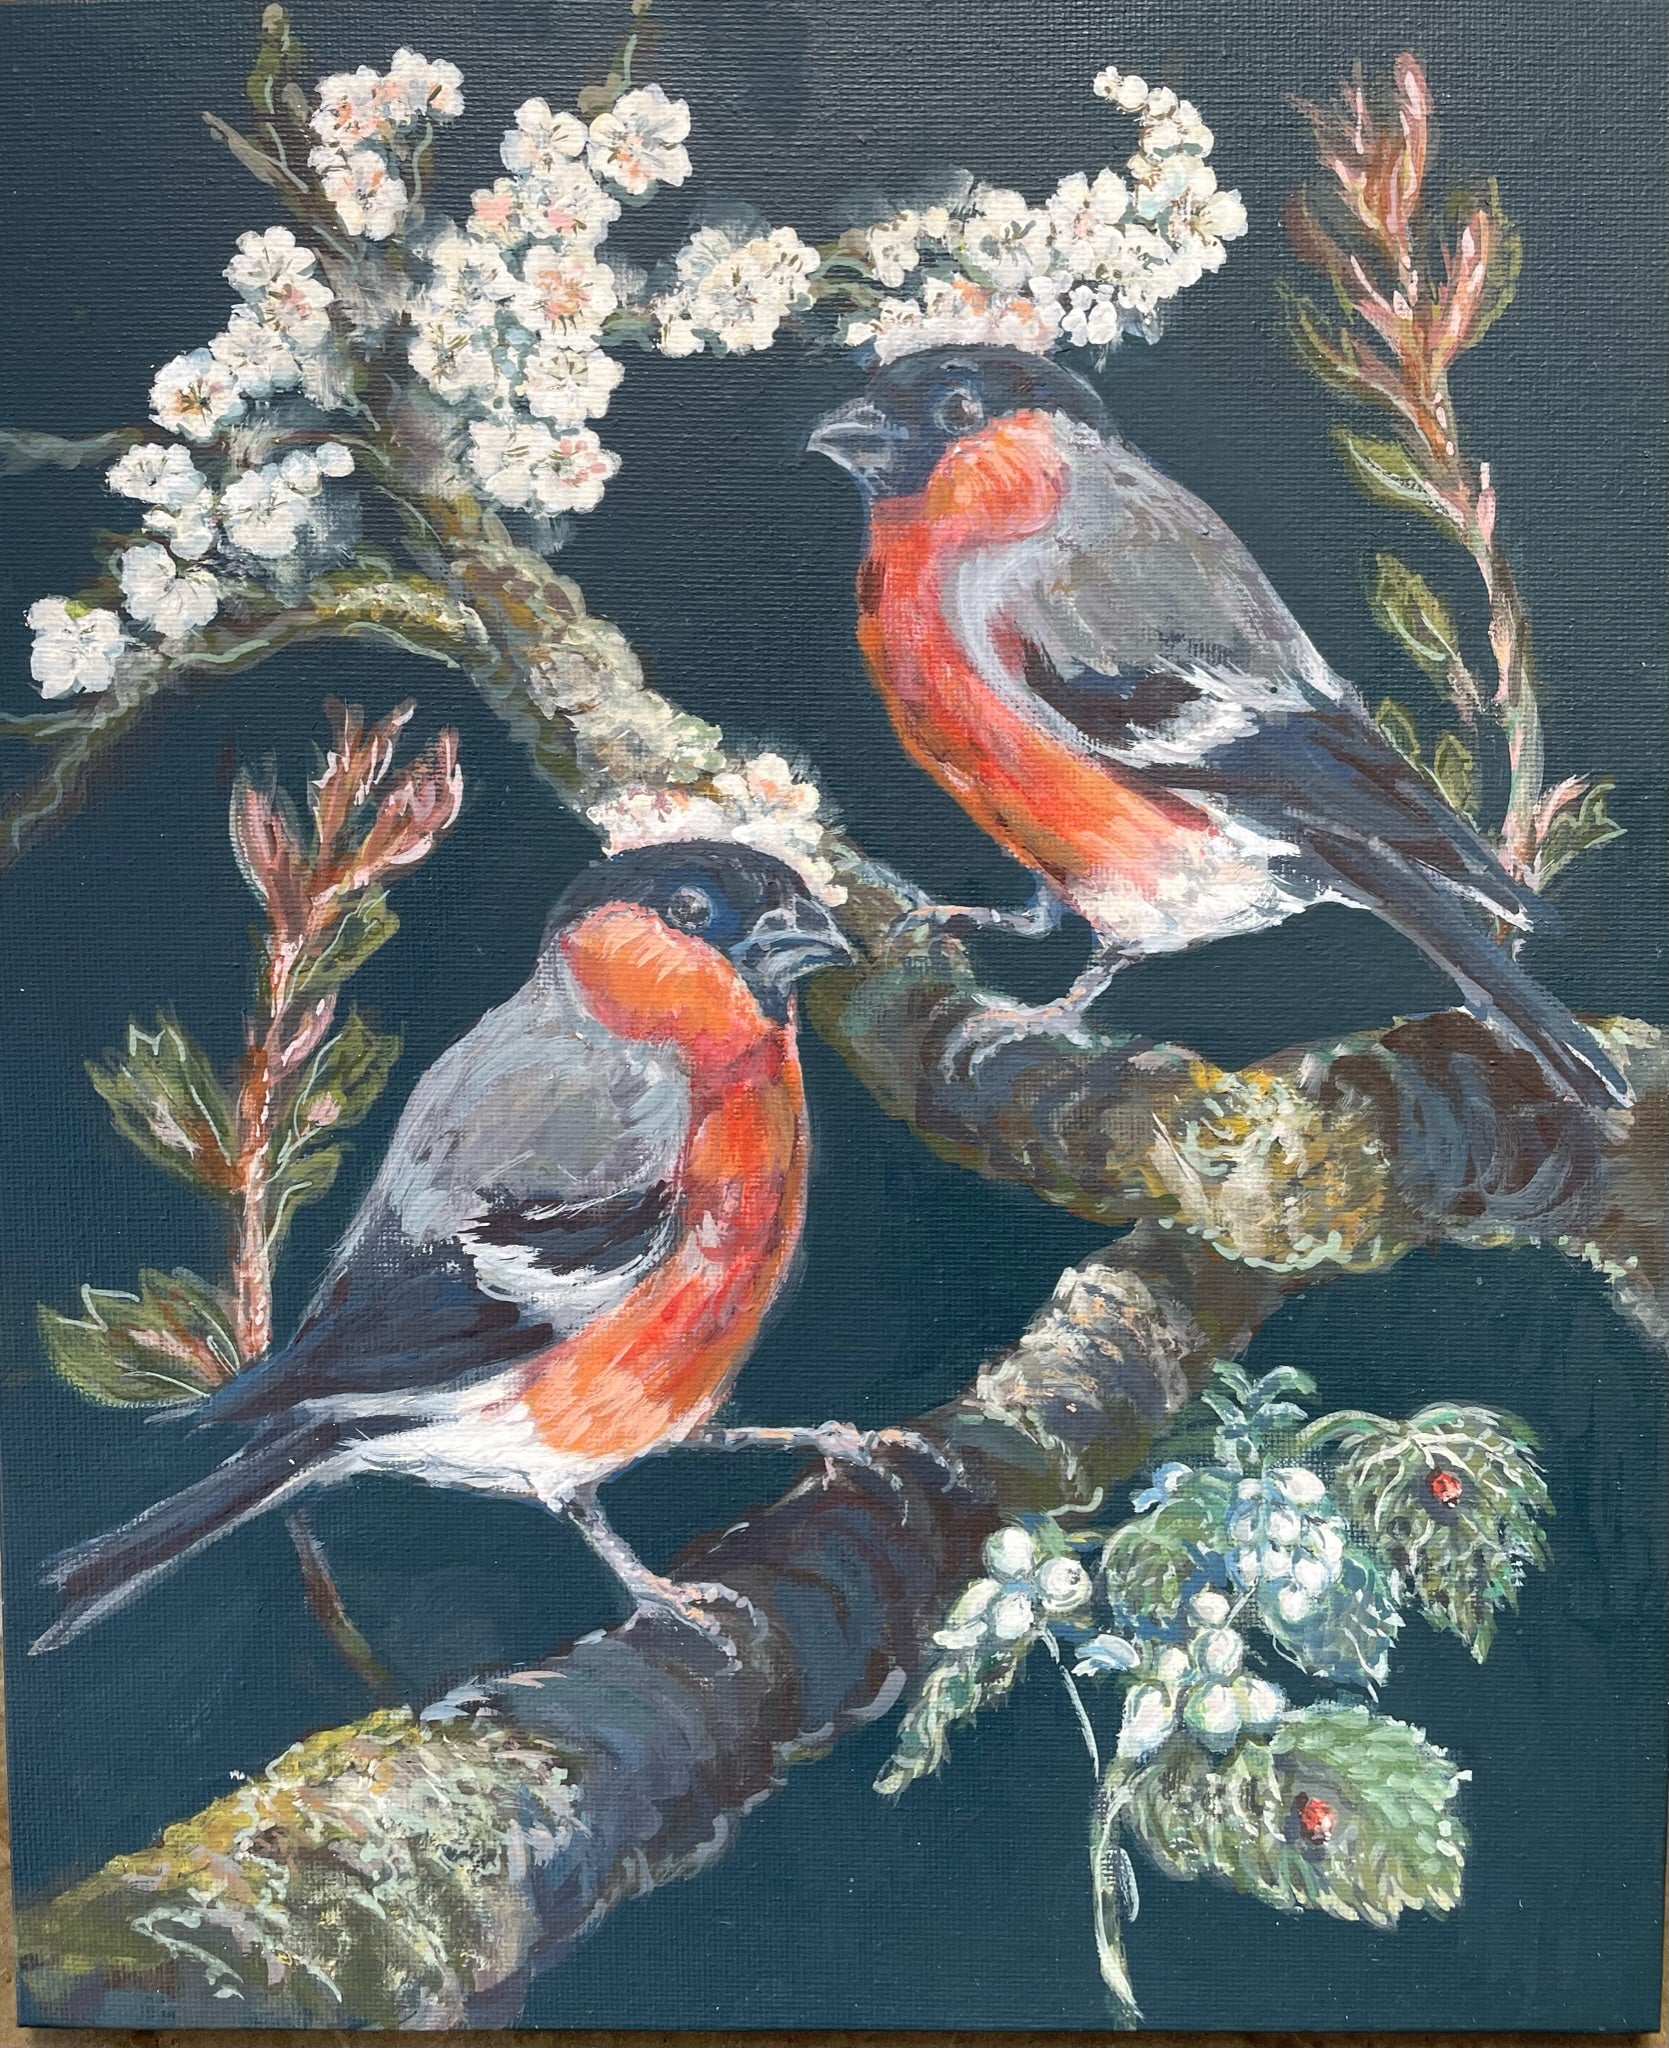 Bullfinches and Blossom  This painting depicts bullfinches amidst blackthorn blossom with other native Spring flora  …including ladybirds on the nettles.